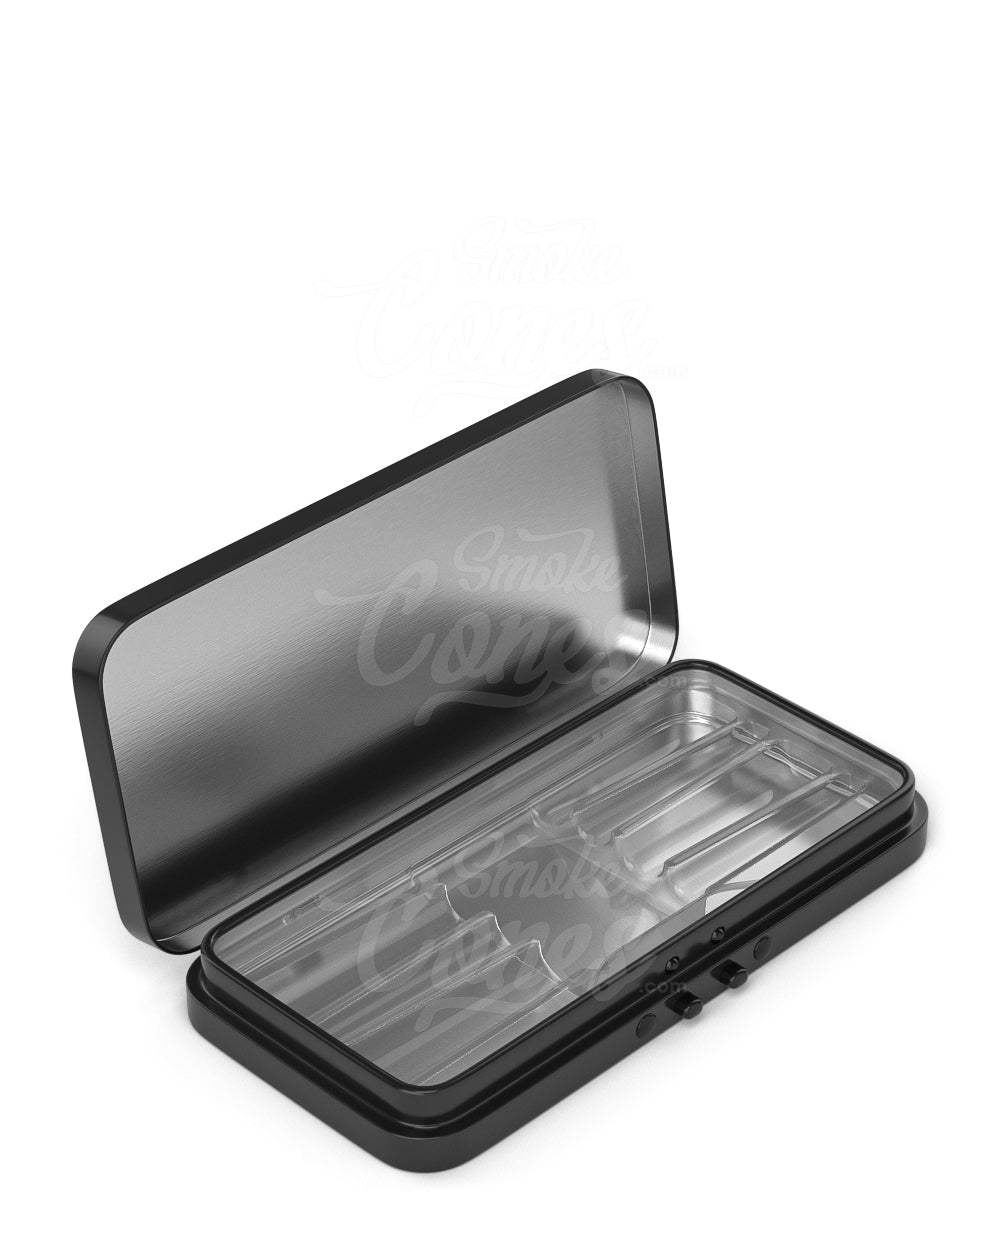 Clear Edible & Joint Box Plastic Insert Tray for 4 King Size 109mm Pre Rolled Cones 100/Box - 7